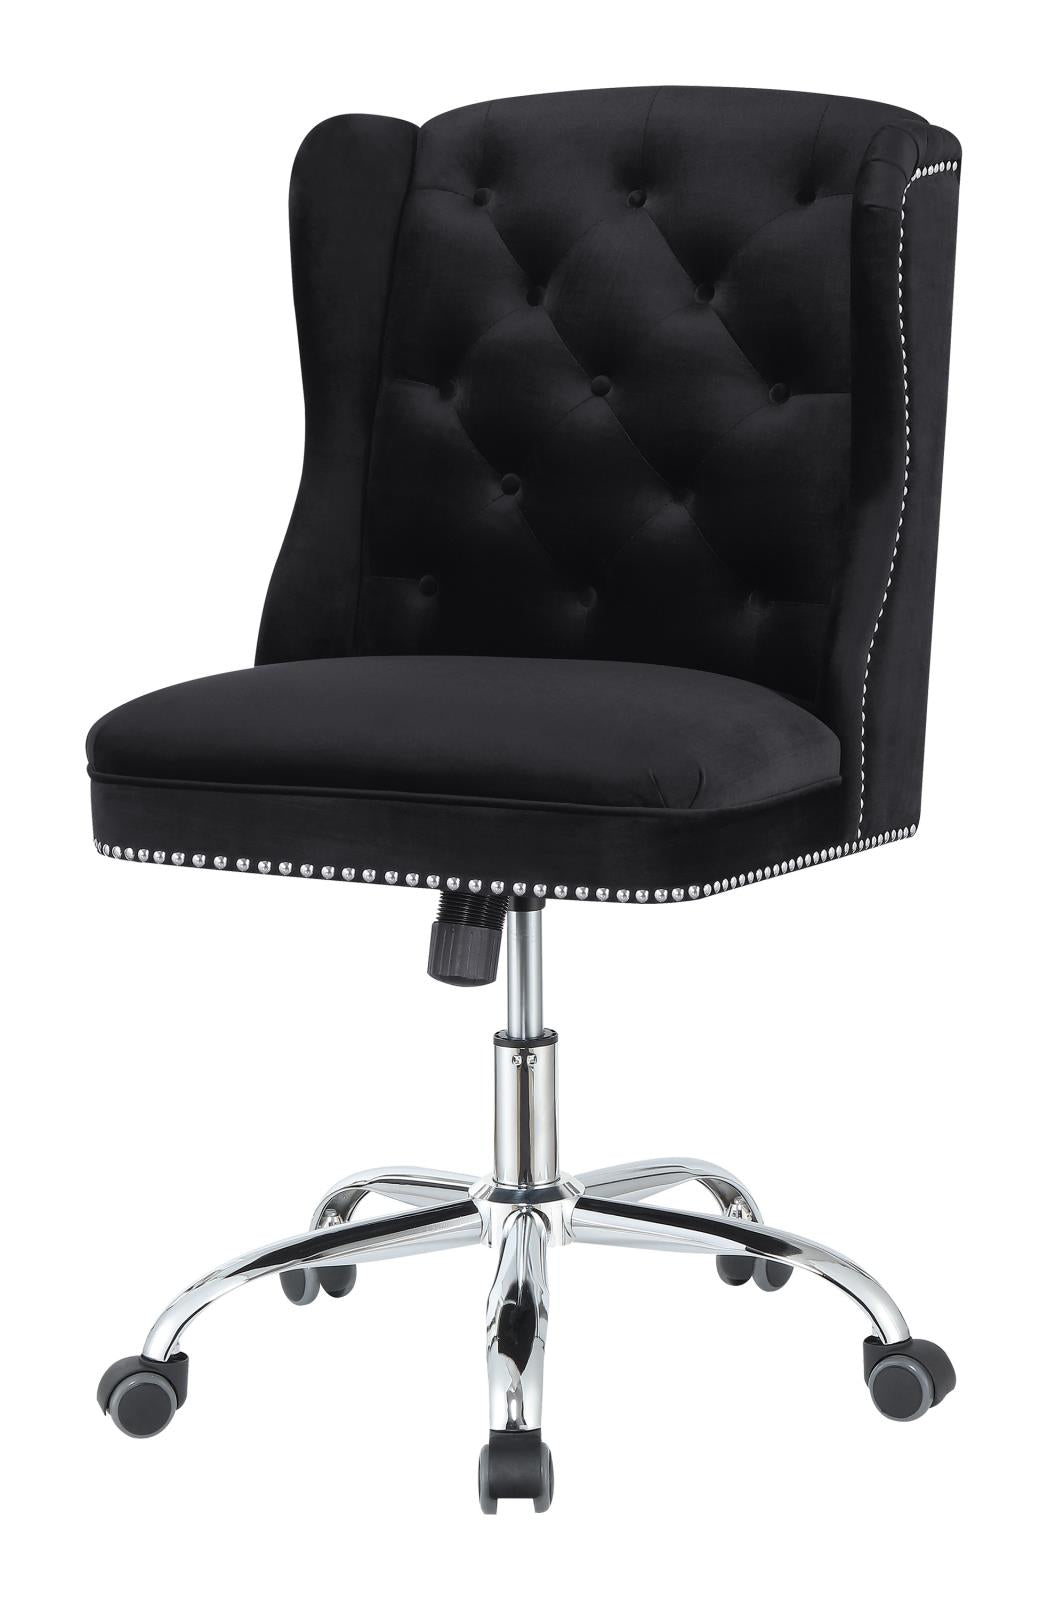 Upholstered Tufted Office Chair Black and Chrome - What A Room